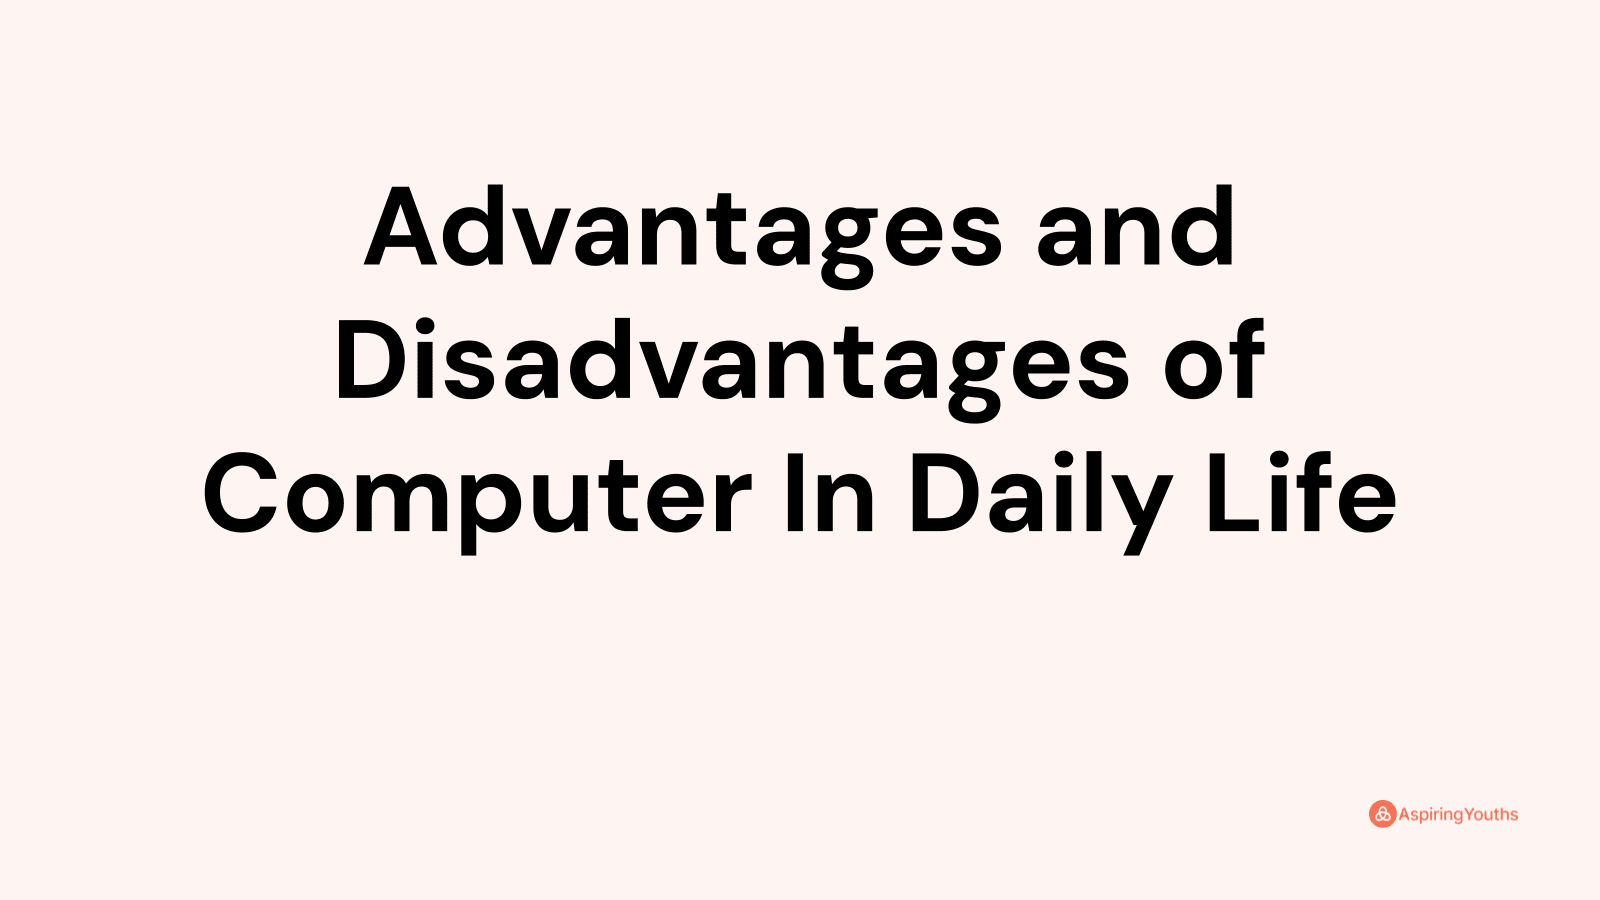 Advantages and disadvantages of Computer In Daily Life